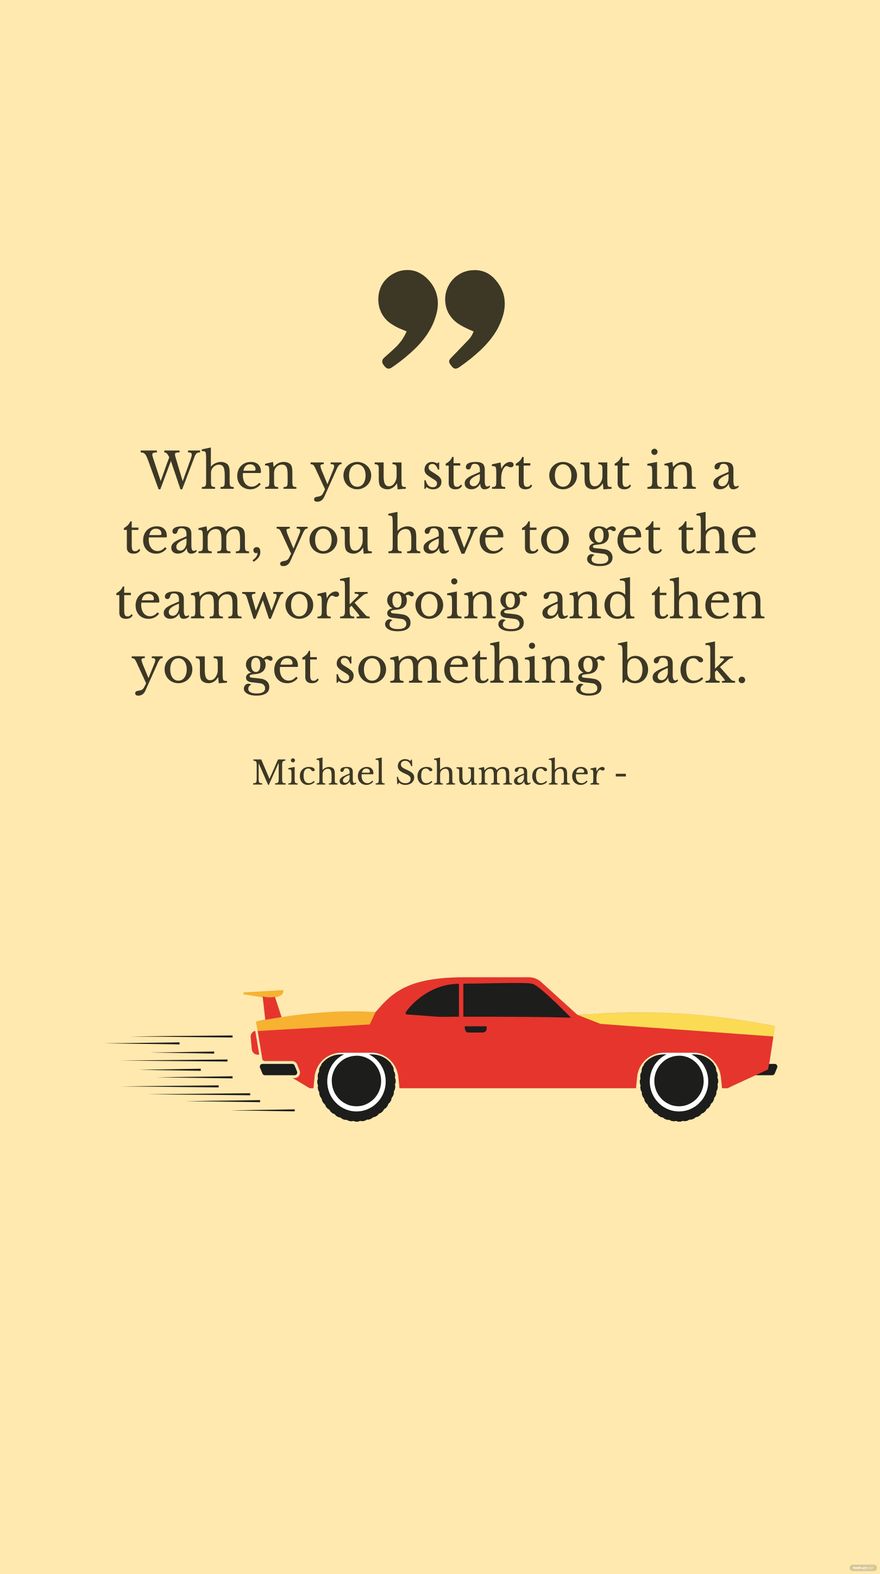 Michael Schumacher - When you start out in a team, you have to get the teamwork going and then you get something back.